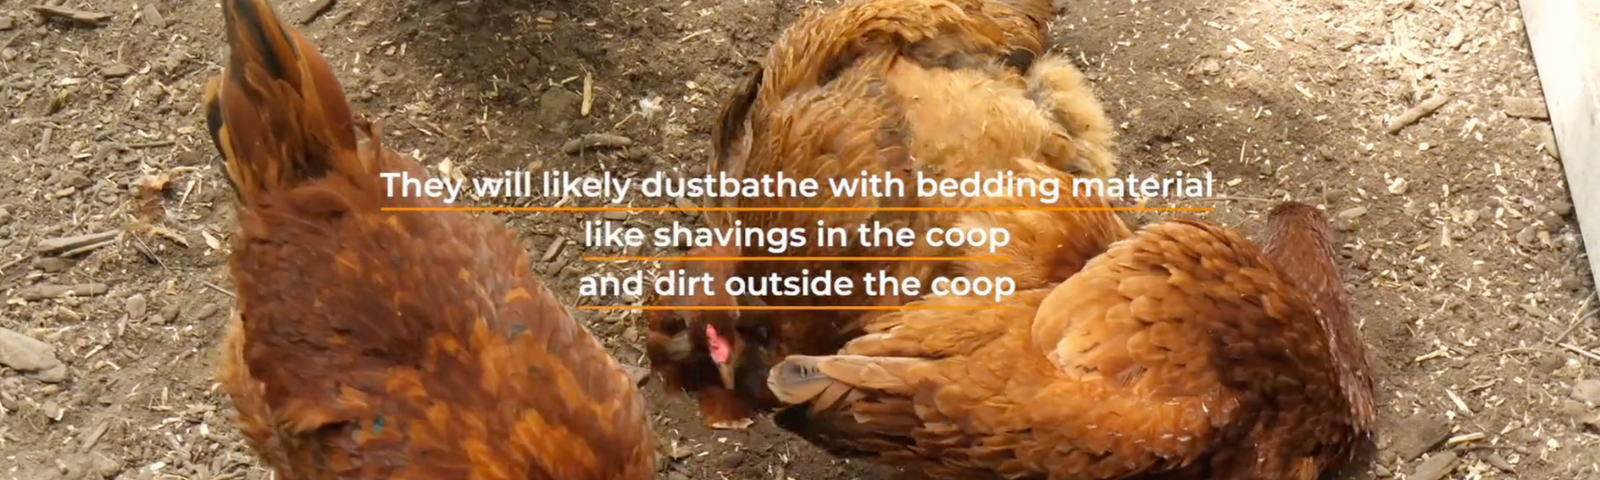 What is Dustbathing and Why do Chickens do it?